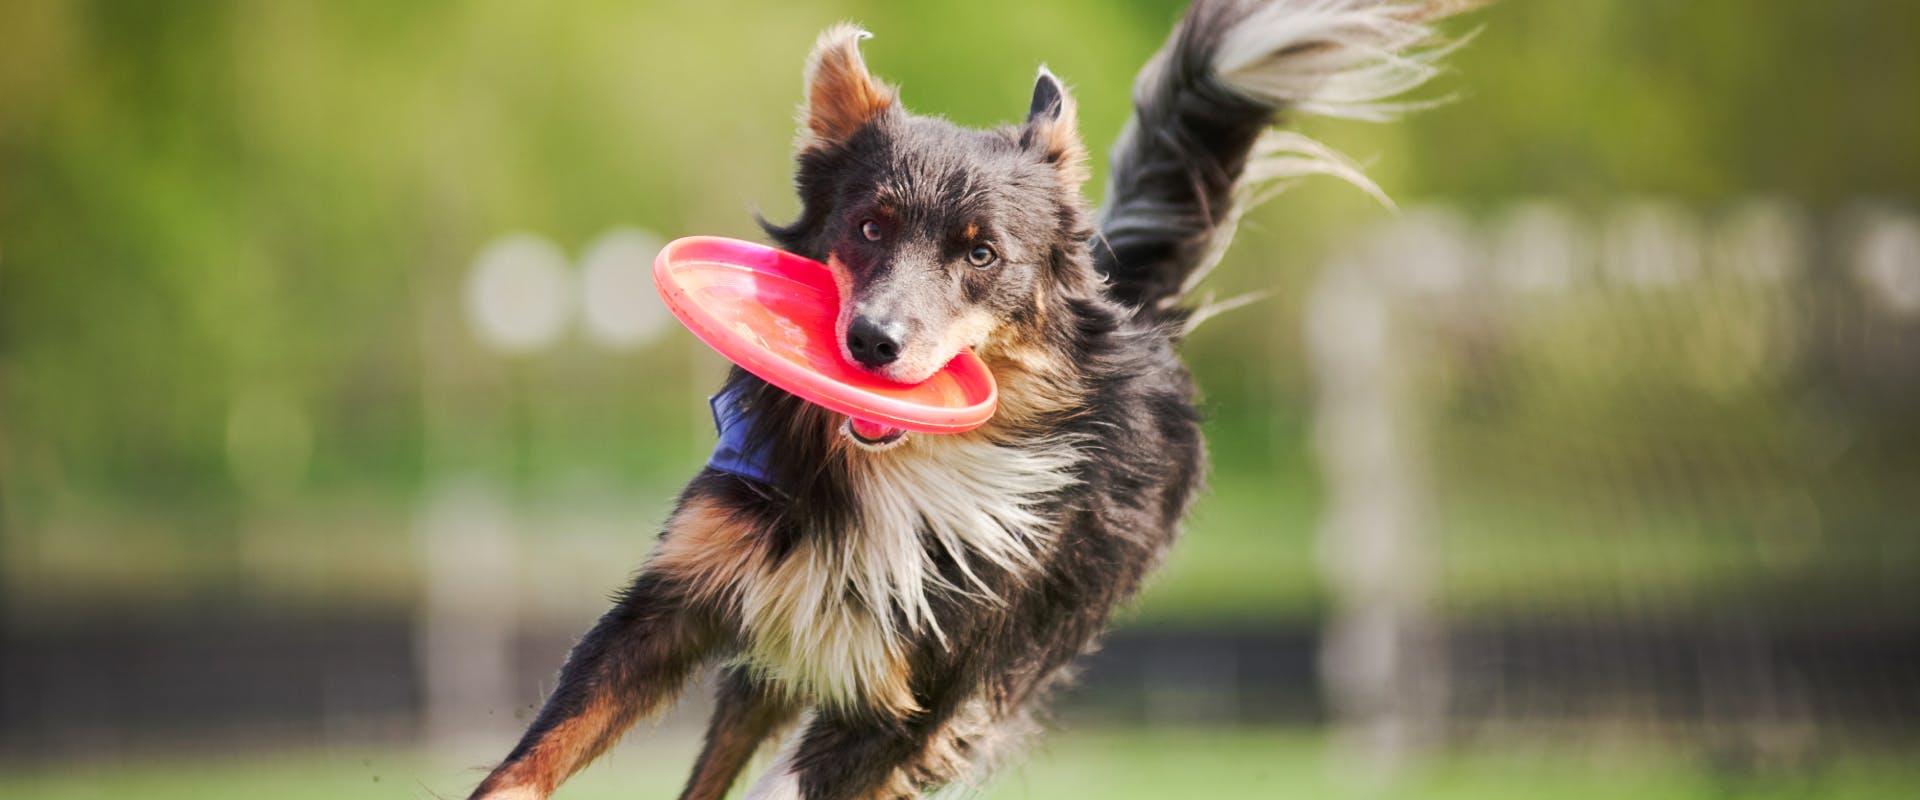 A dog running with a frisbee.